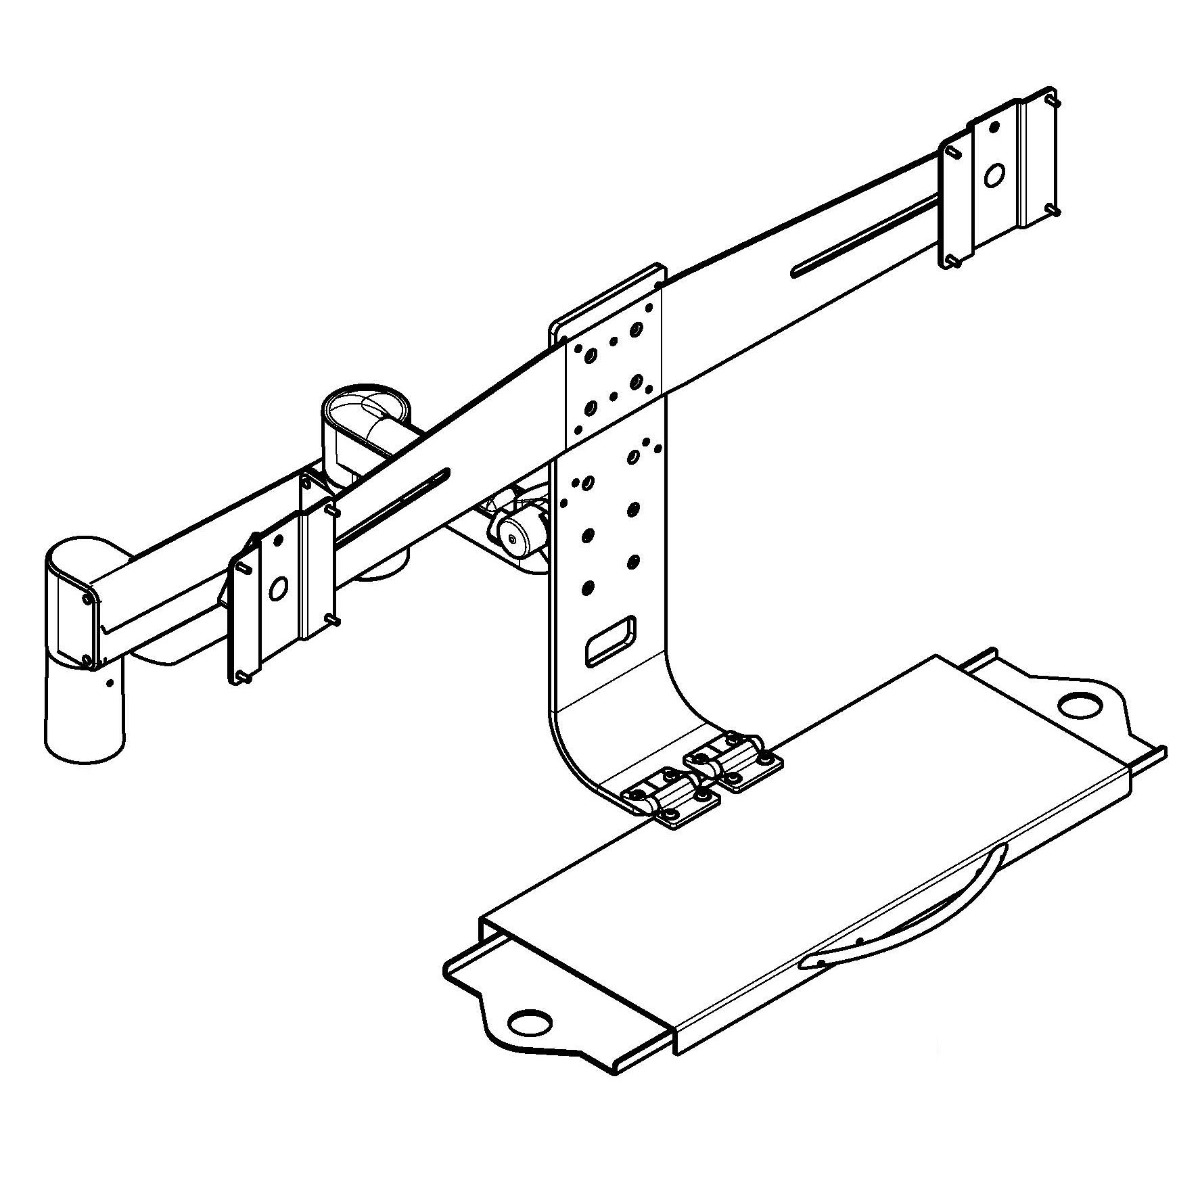 TRP2718D workstation and monitor keyboard arm isometric view specification drawing